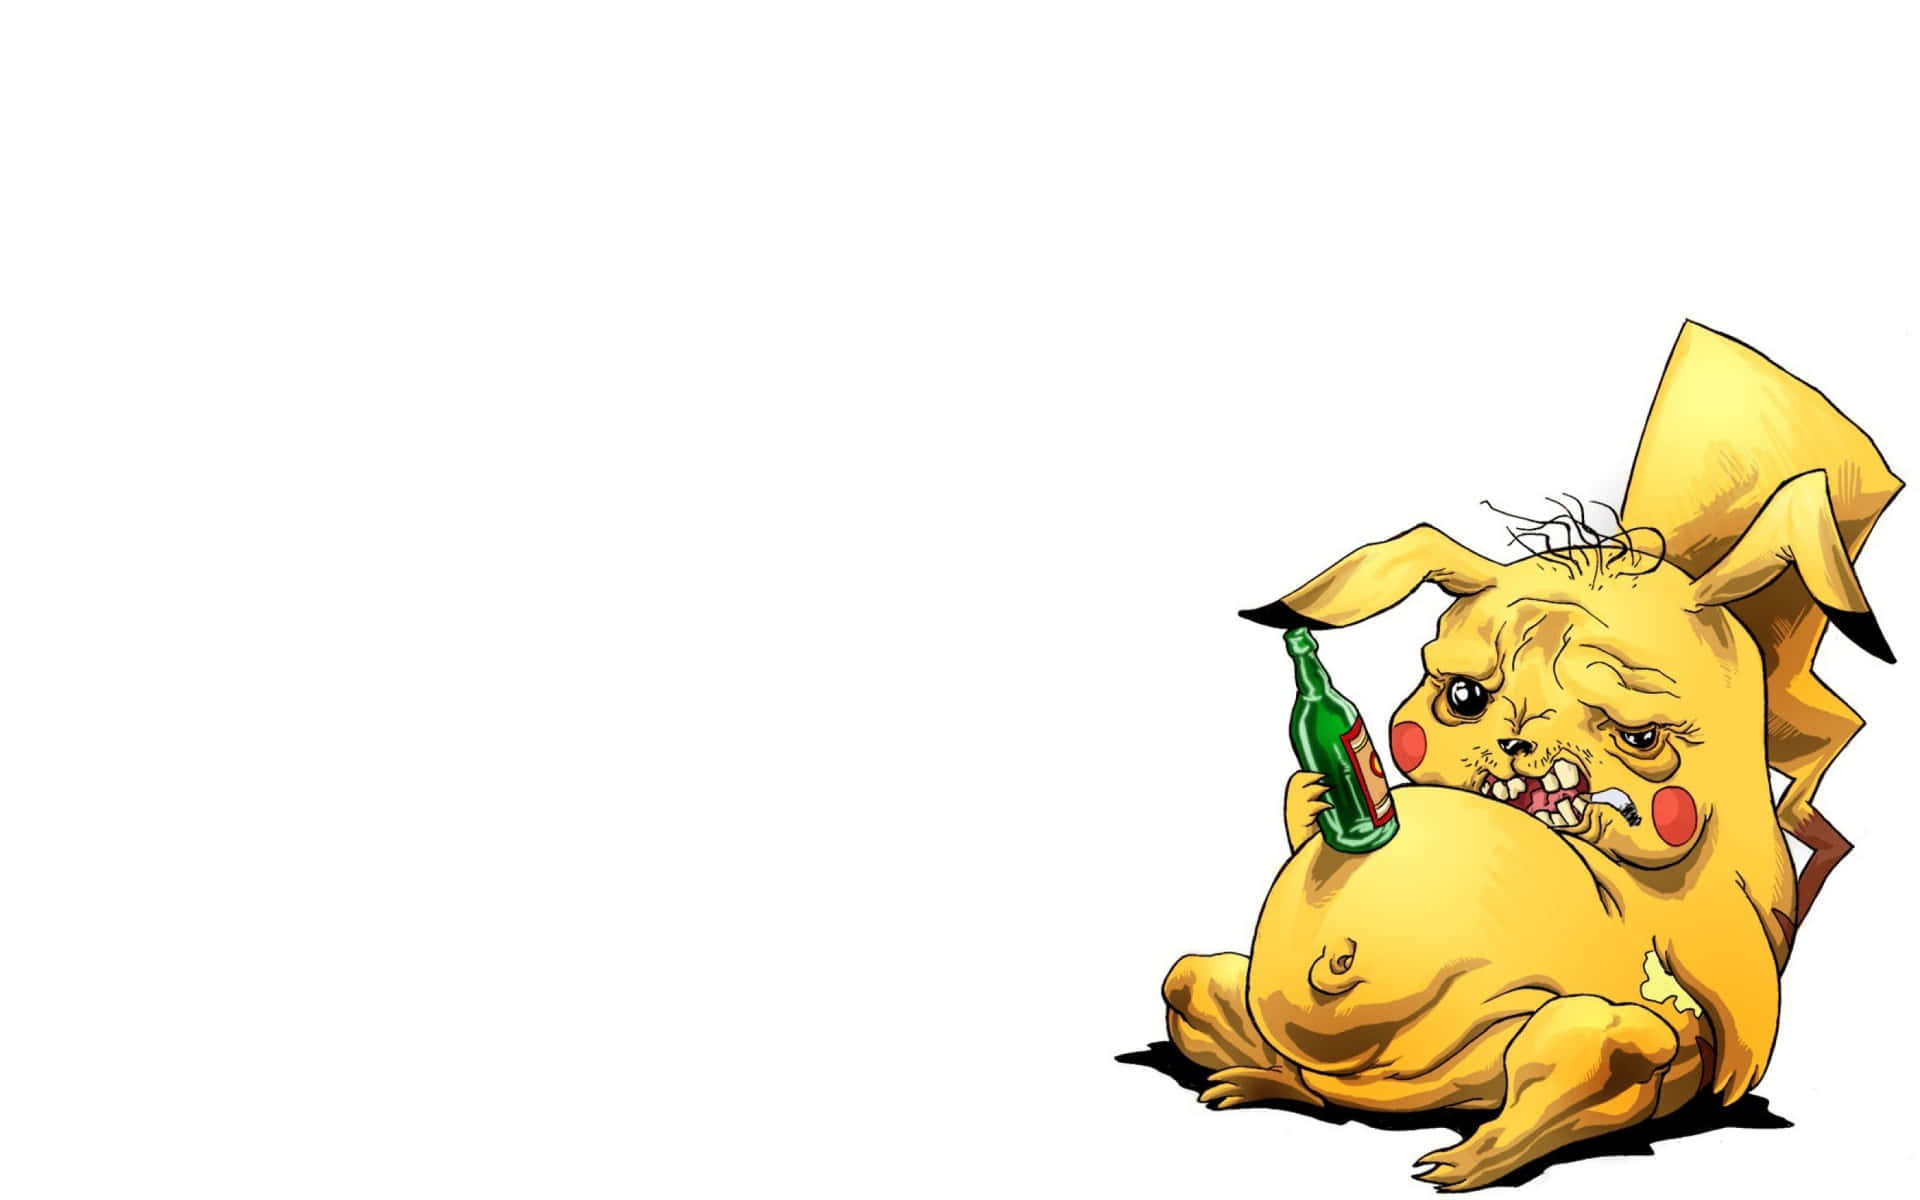 Pikachu Shares A Laugh With Its Friends